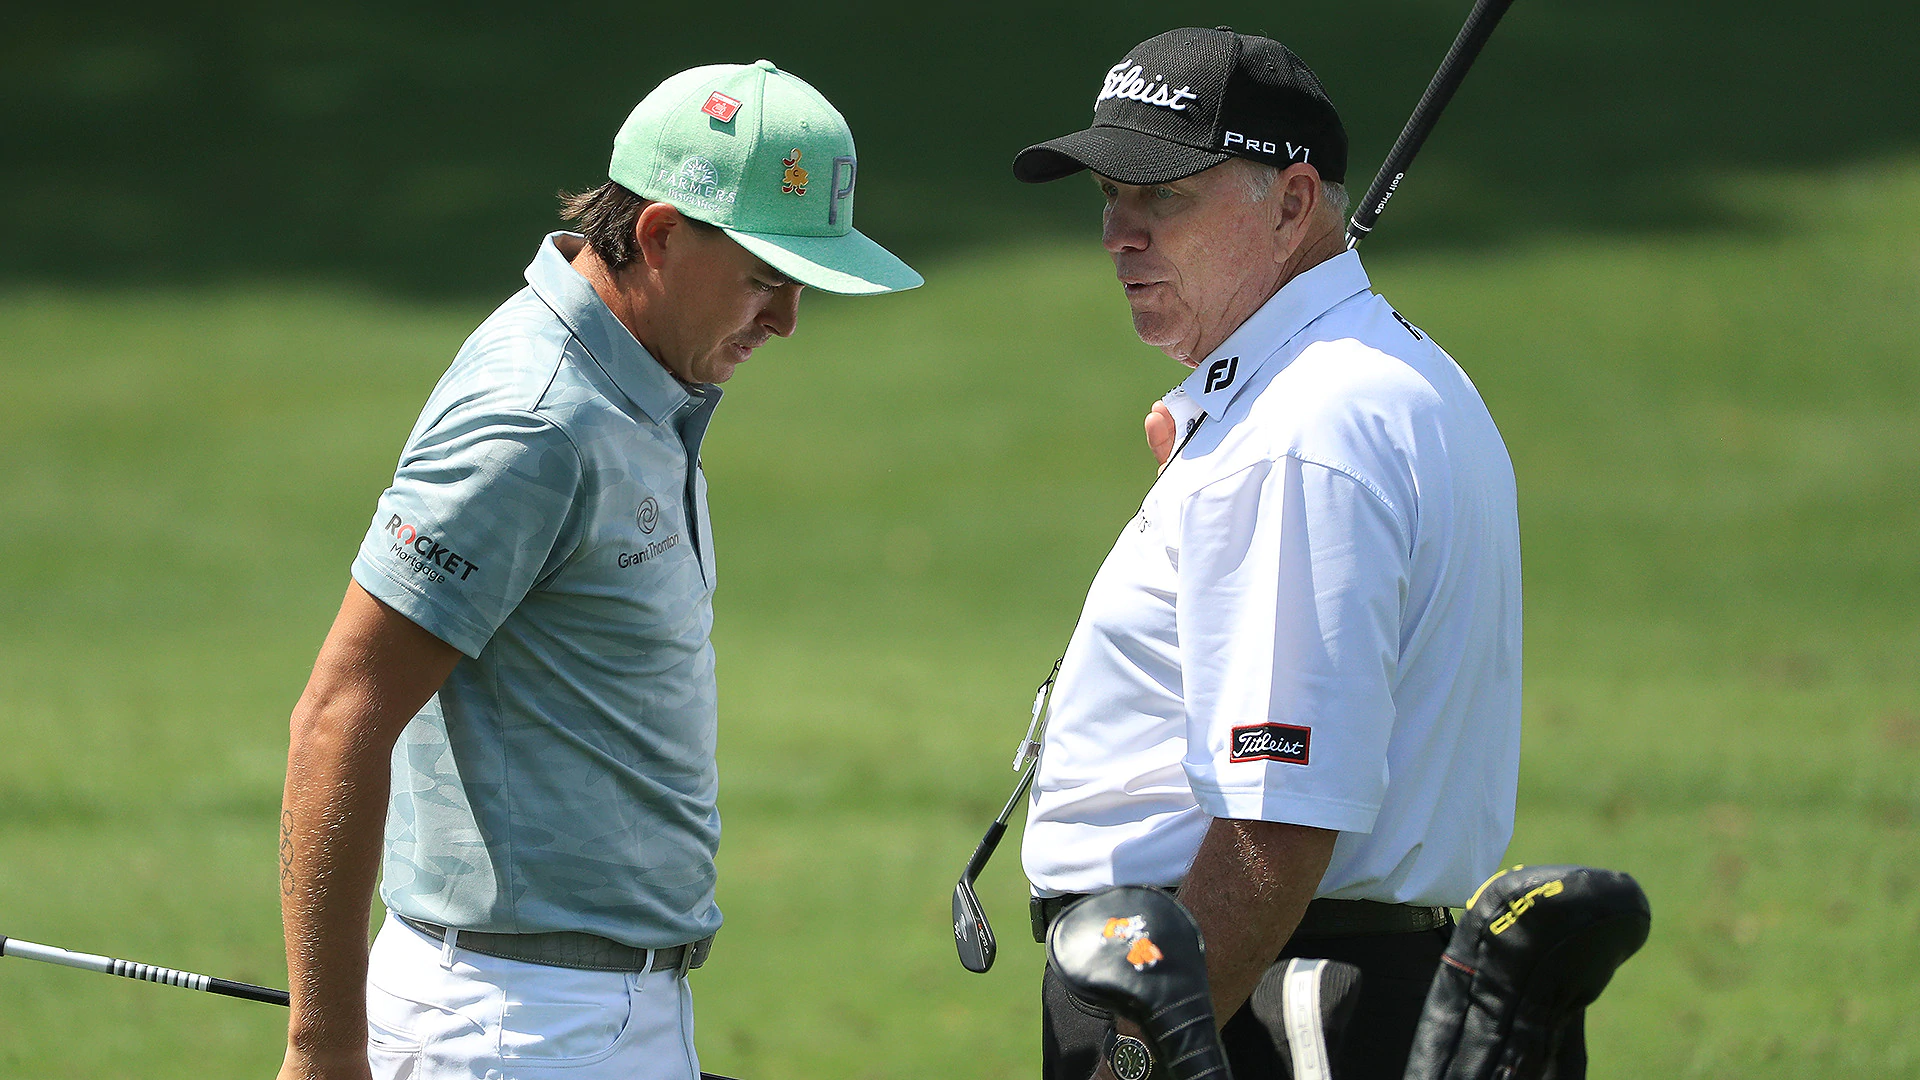 Podcast: Brandel Chamblee on Butch Harmon's criticism and who benefits most from the break